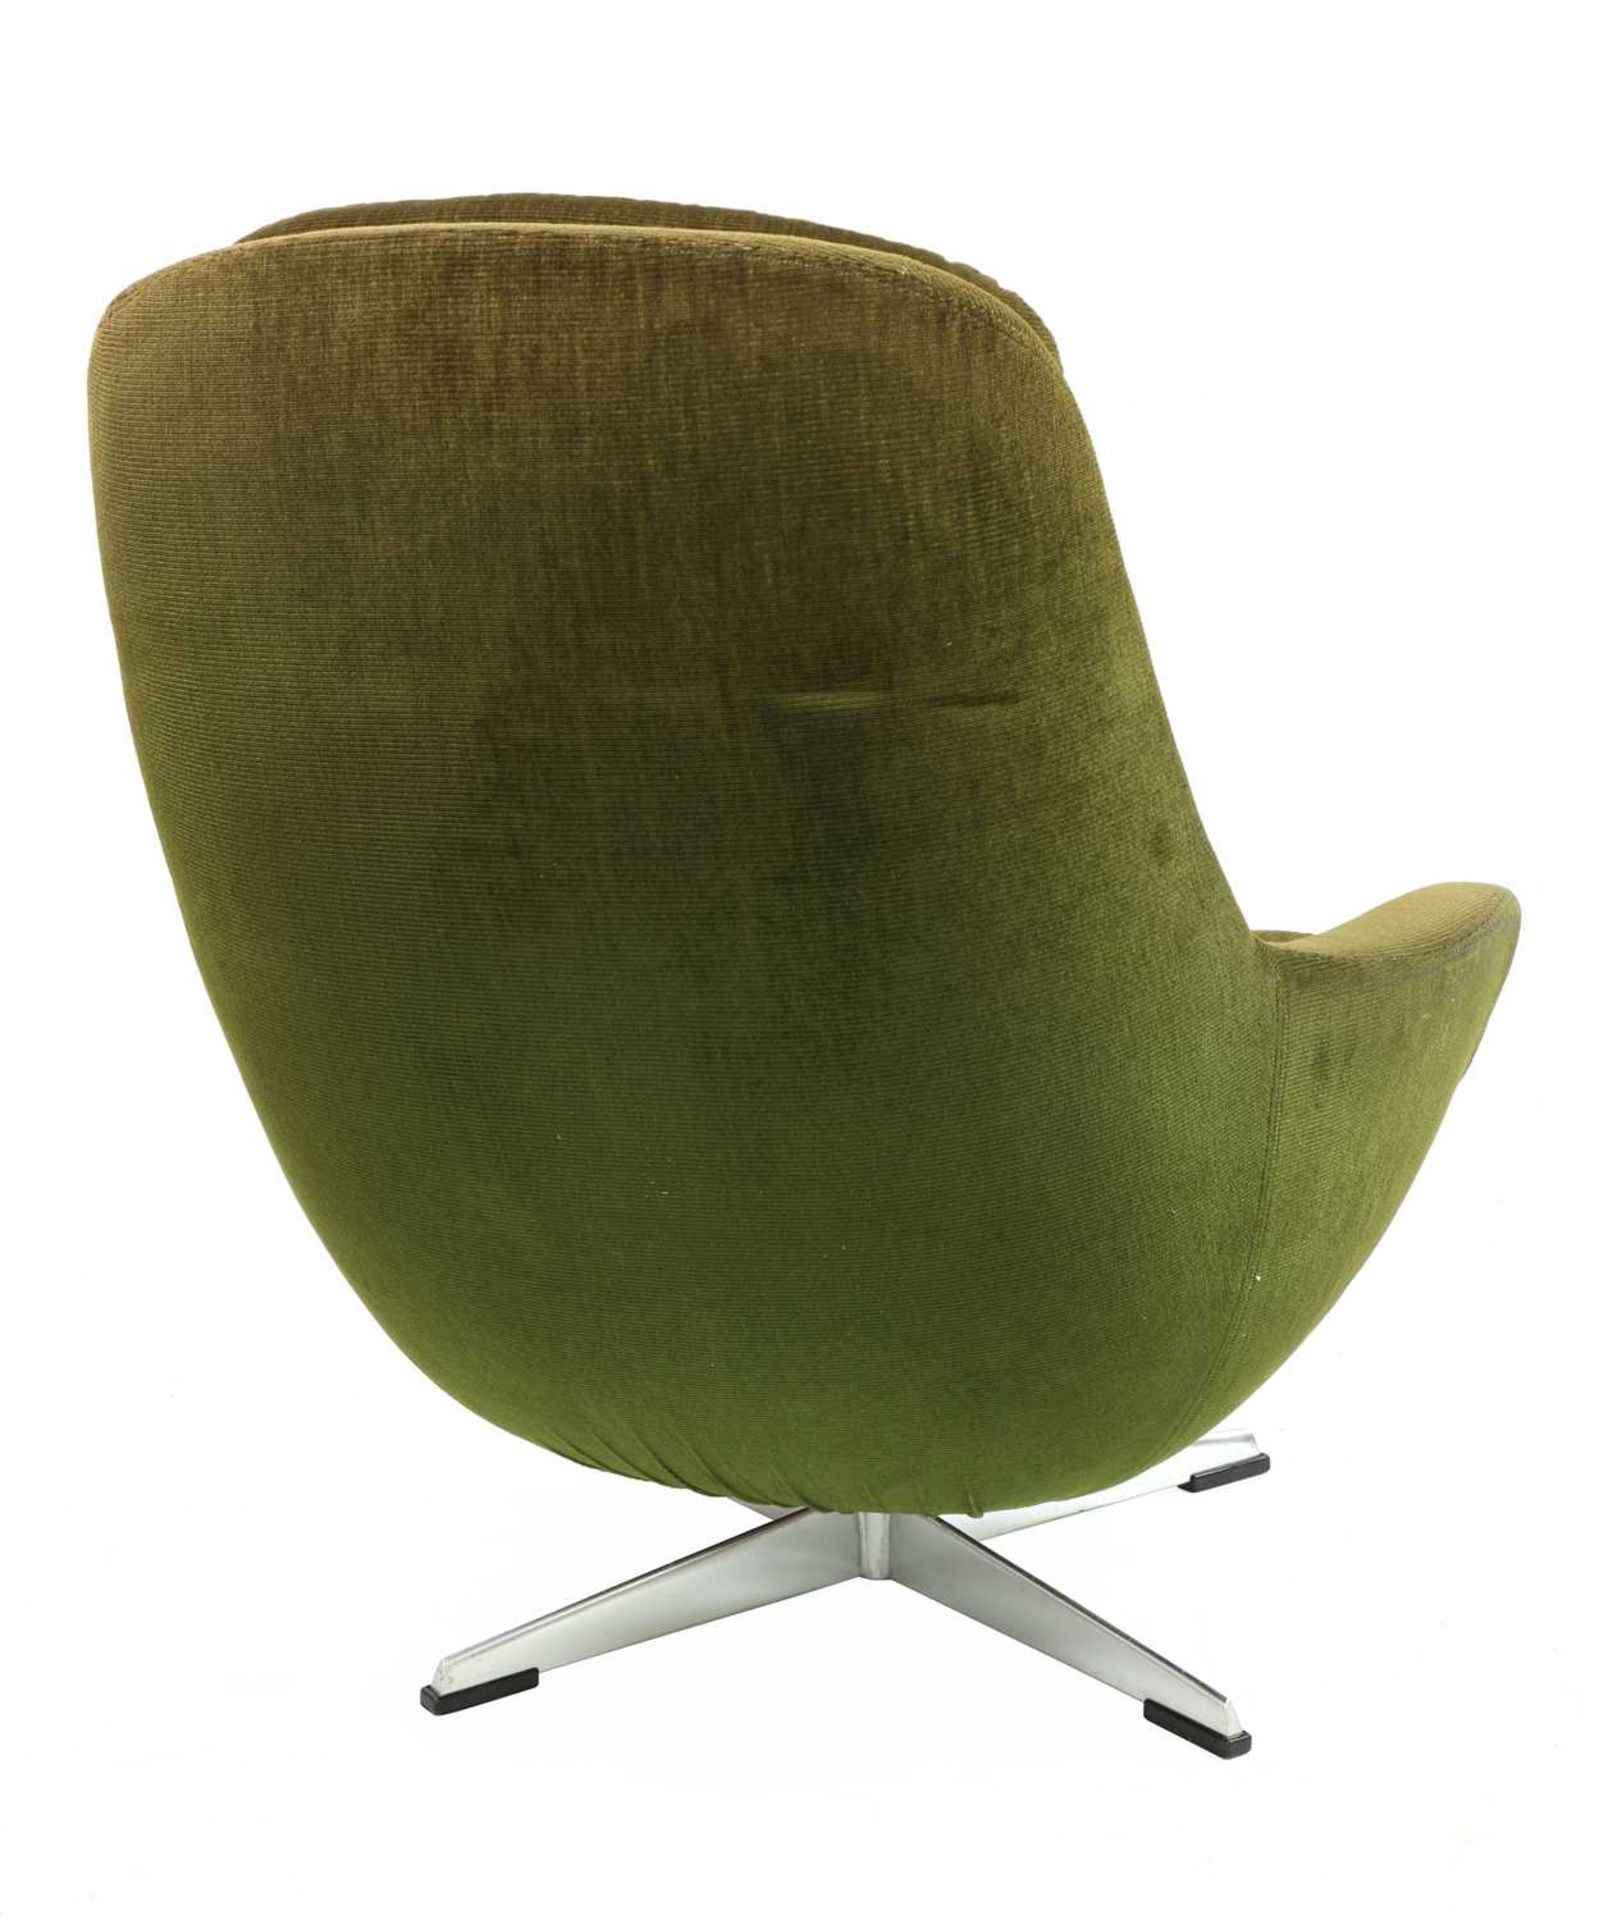 A green corduroy lounge chair, - Image 3 of 4